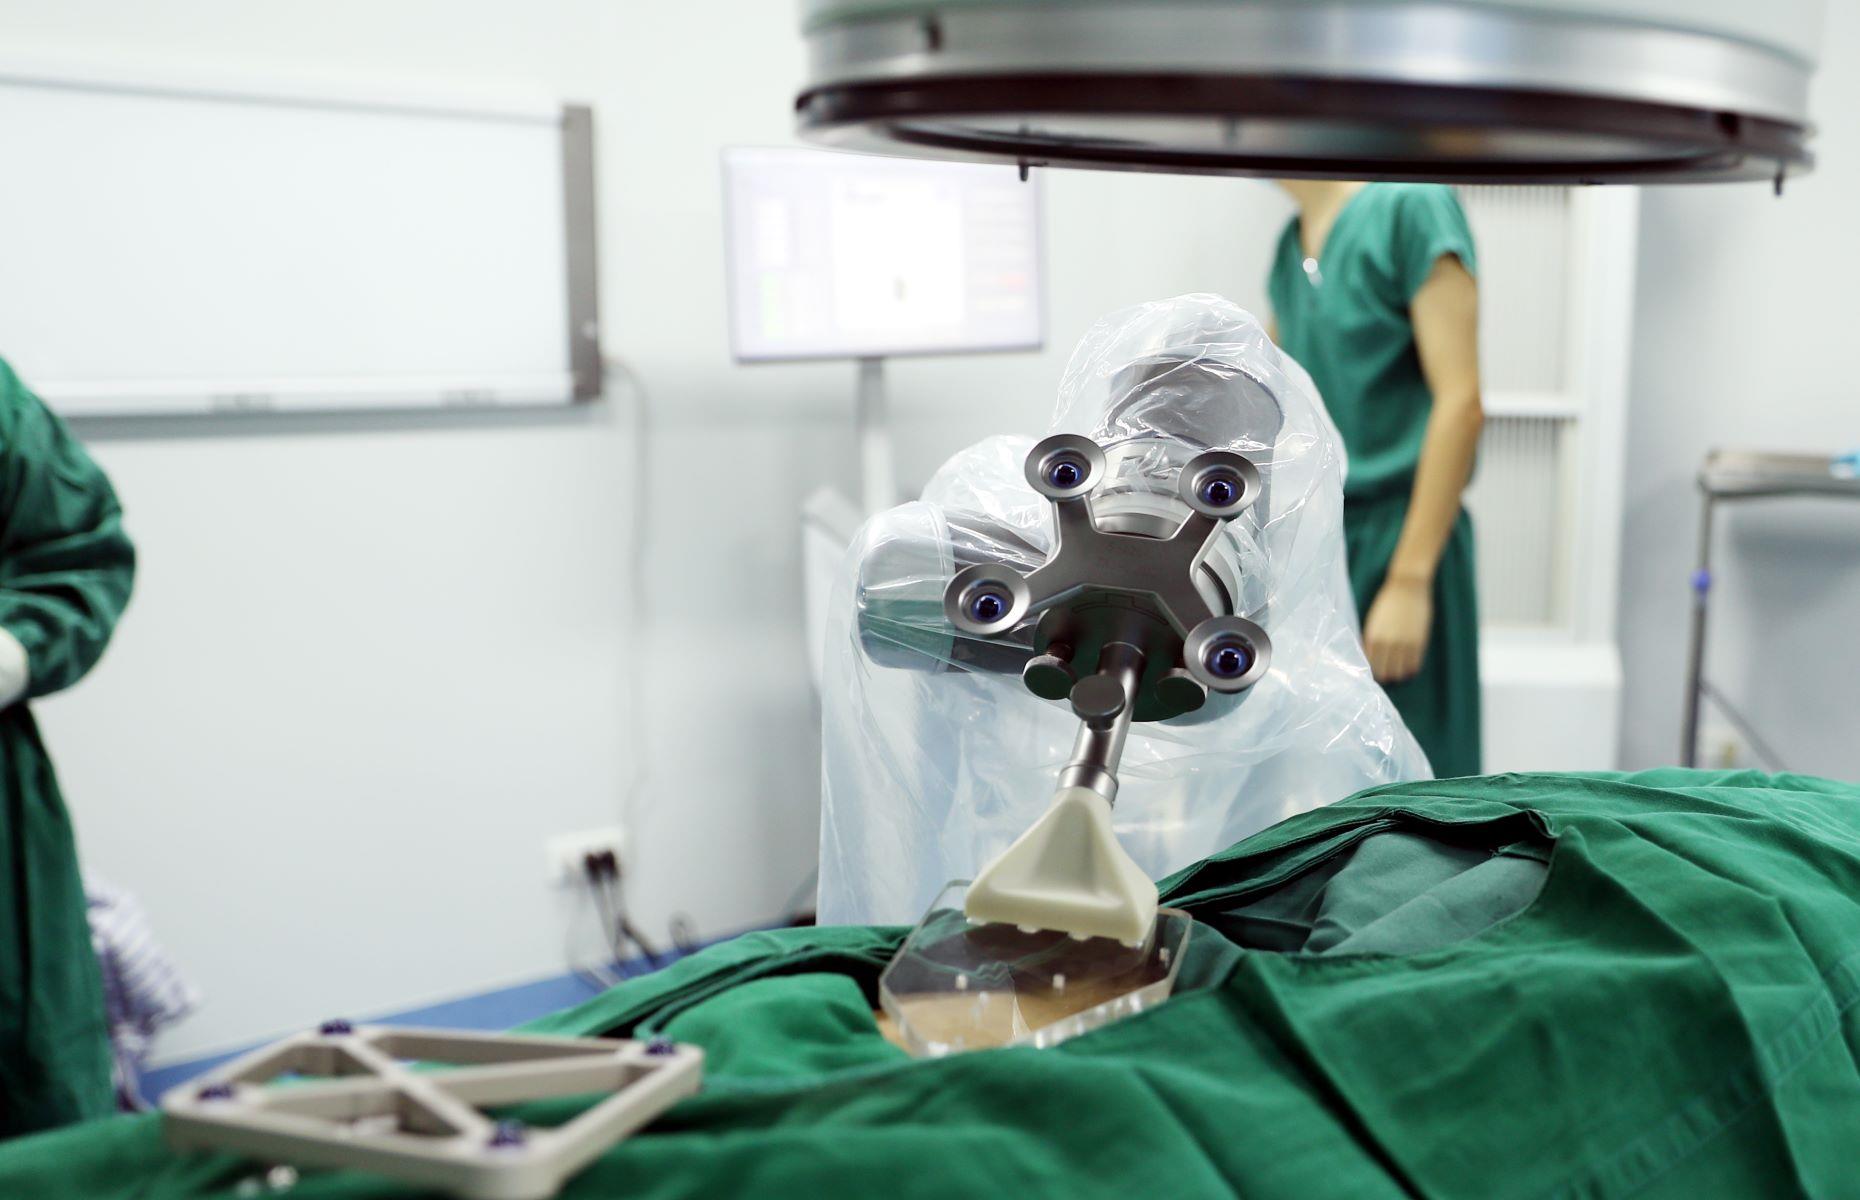 <p>Robots are also taking over the operating theater. Promoting robotic-assisted surgery as "a minimally invasive option", American company Intuitive Surgery launched its da Vinci robotic surgical system way back in 2000, and they have since been used in more than 10 million procedures.</p>  <p>Ultra-precise, robo-surgeons are currently used for everything from knee replacement surgery to vision correction. Futurologists predict that robots will almost certainly operate on patients independently and replace human surgeons one day.</p>